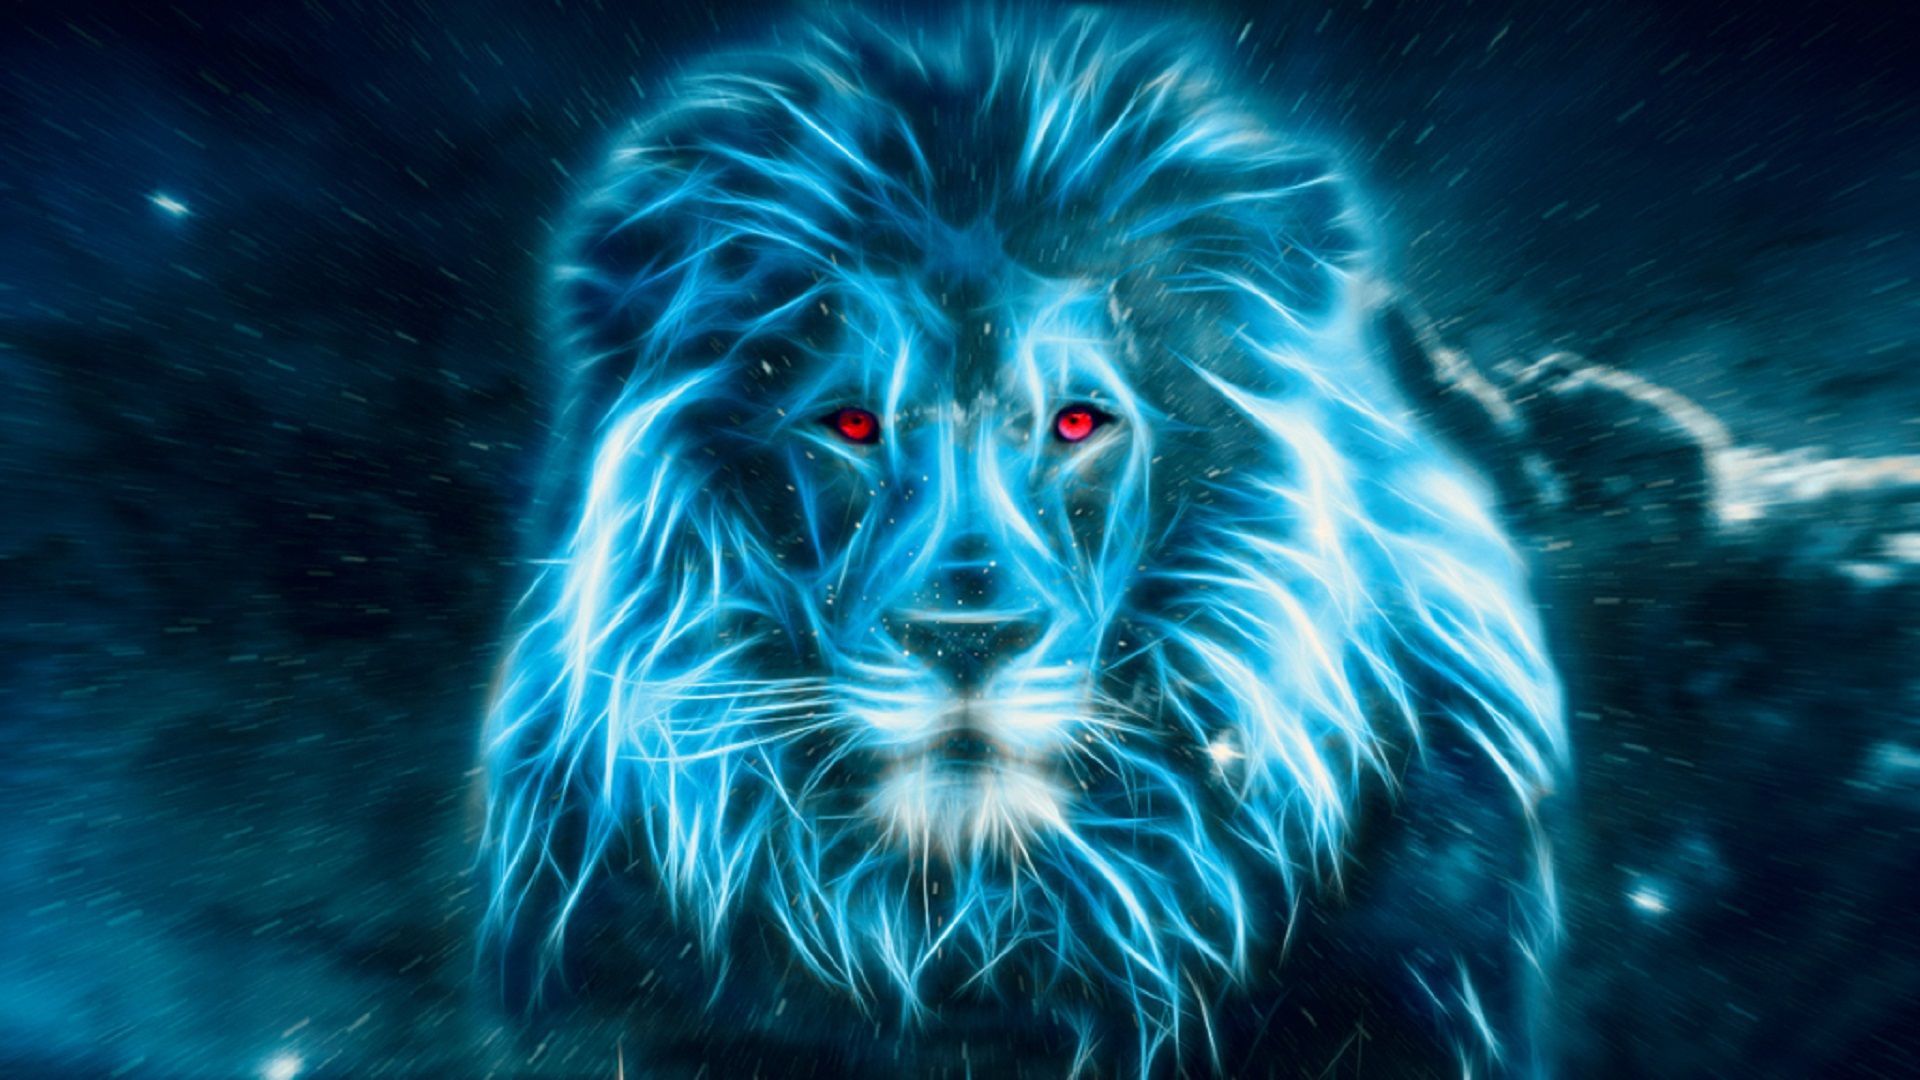 Wallpaper of Lion in Blue and red eyes